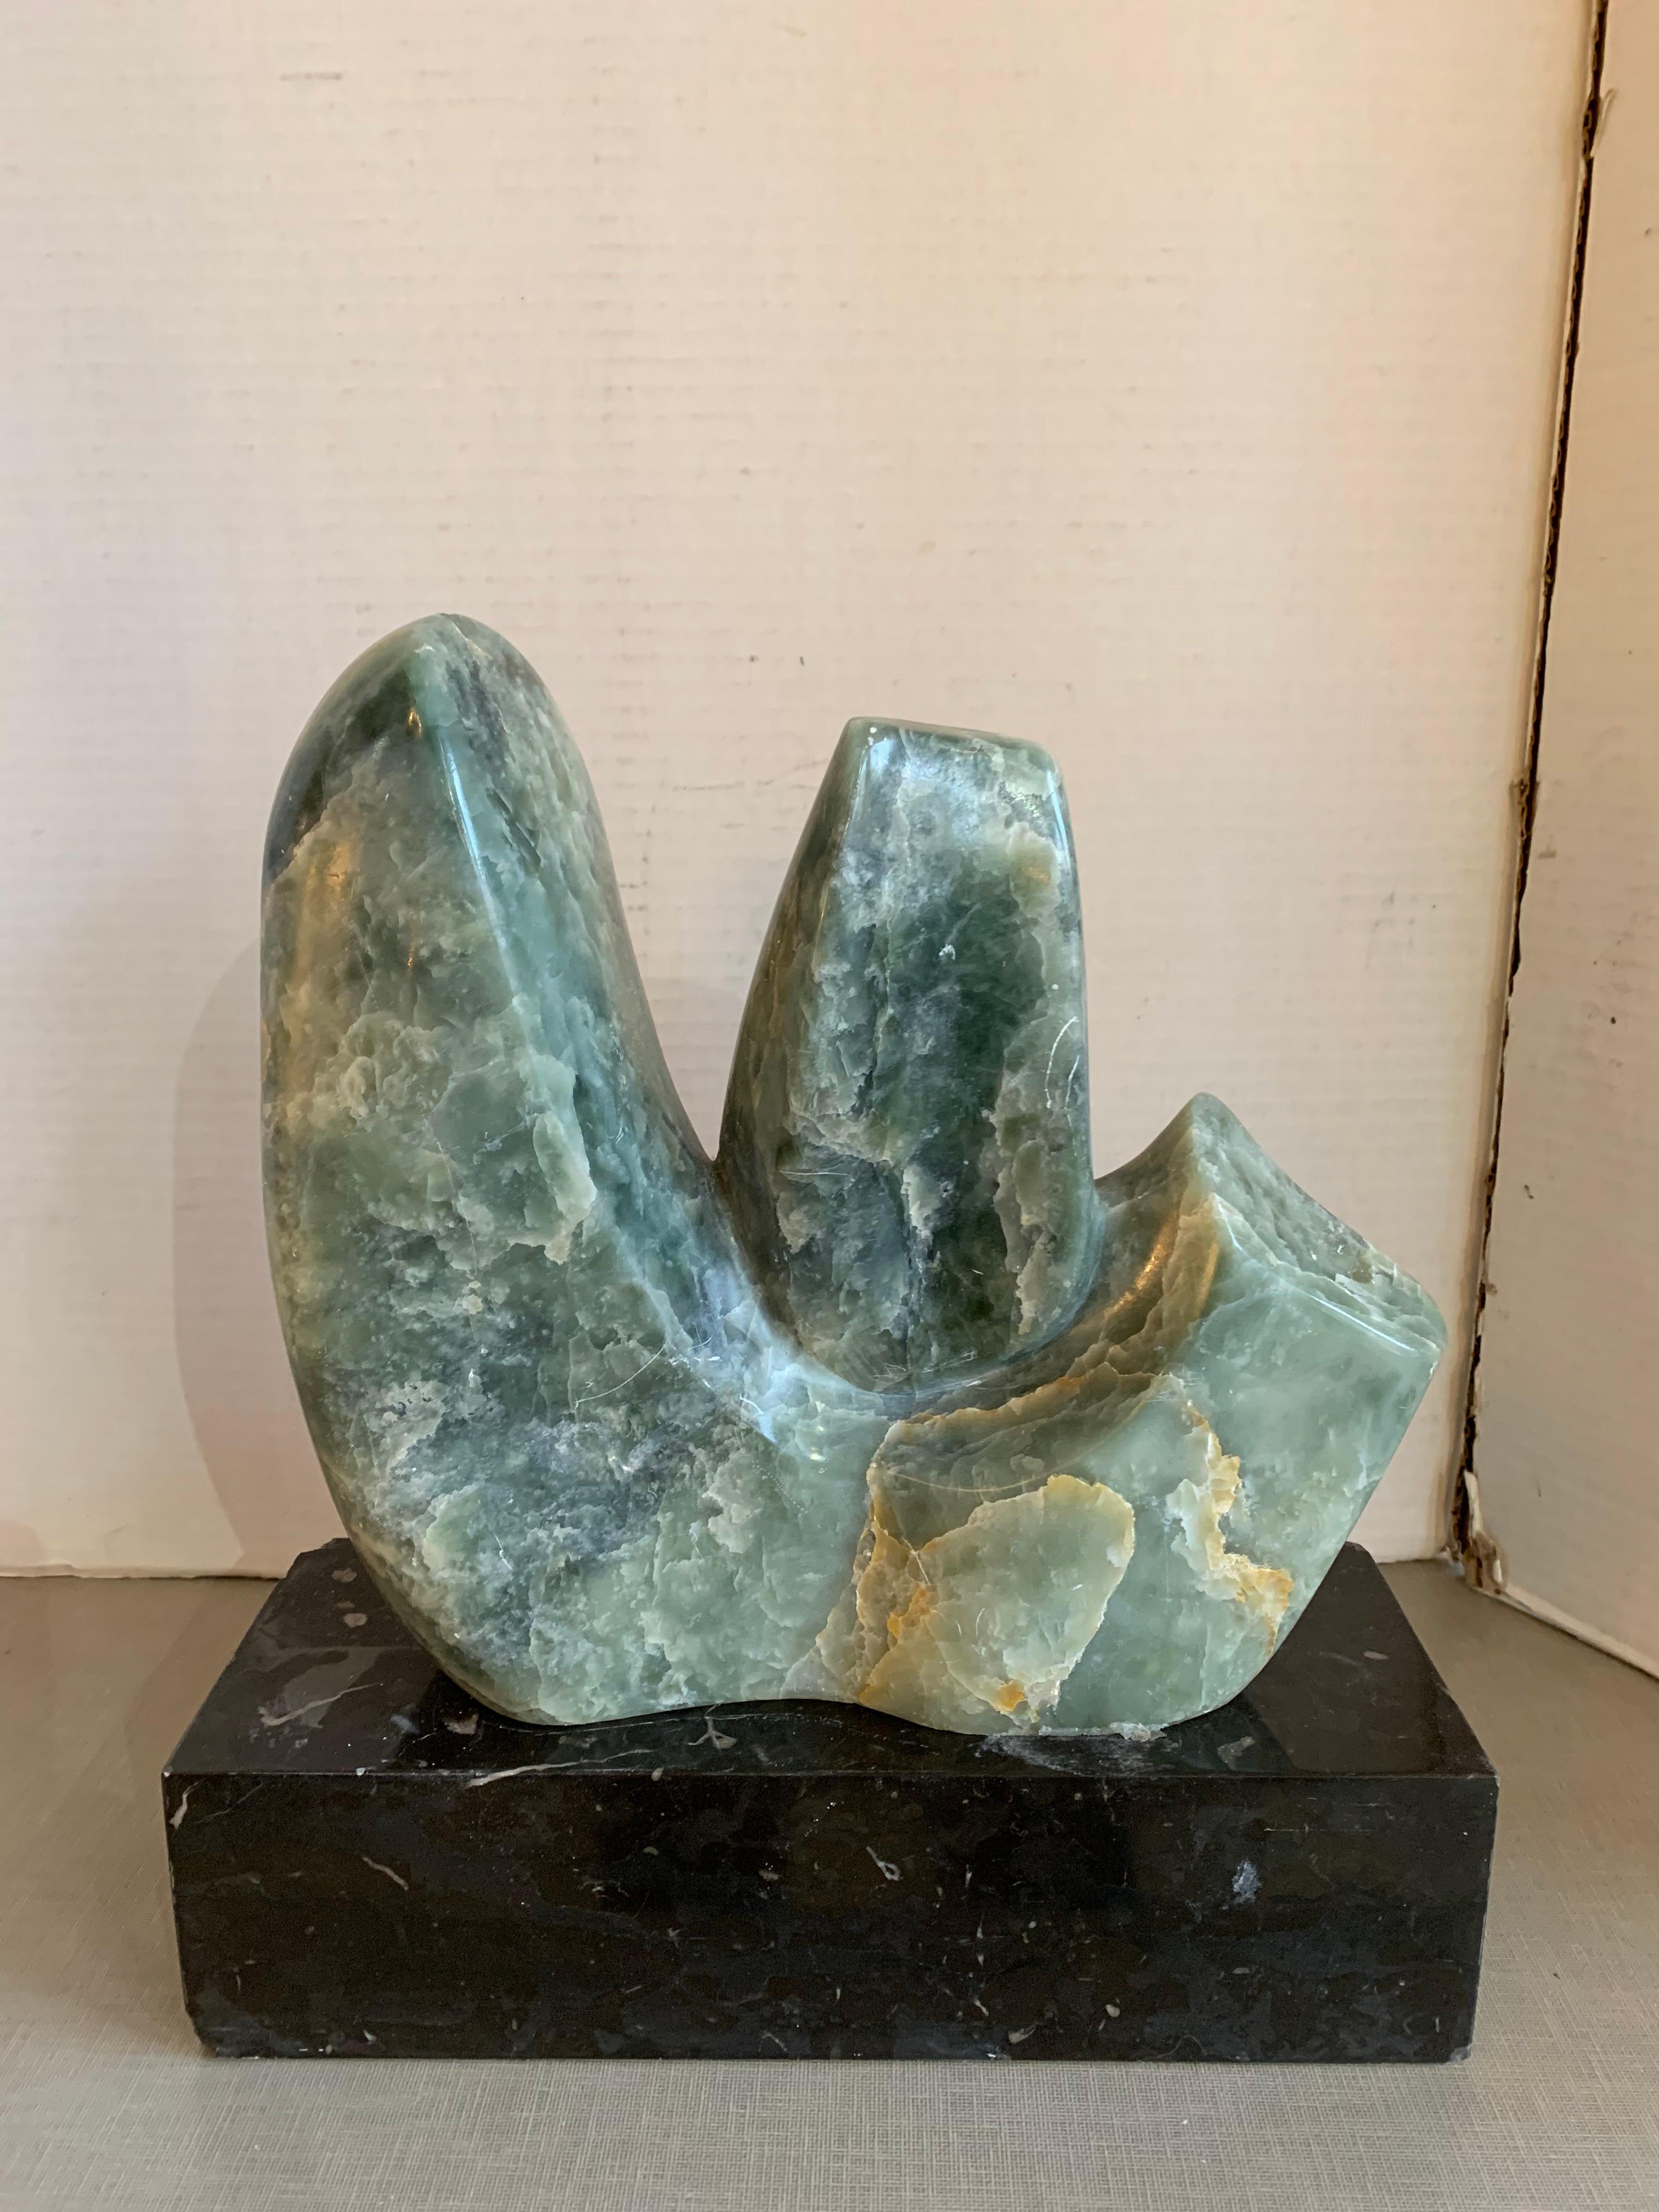 This is a abstract stone and marble sculpture from the 1970s by A. Schmetter.